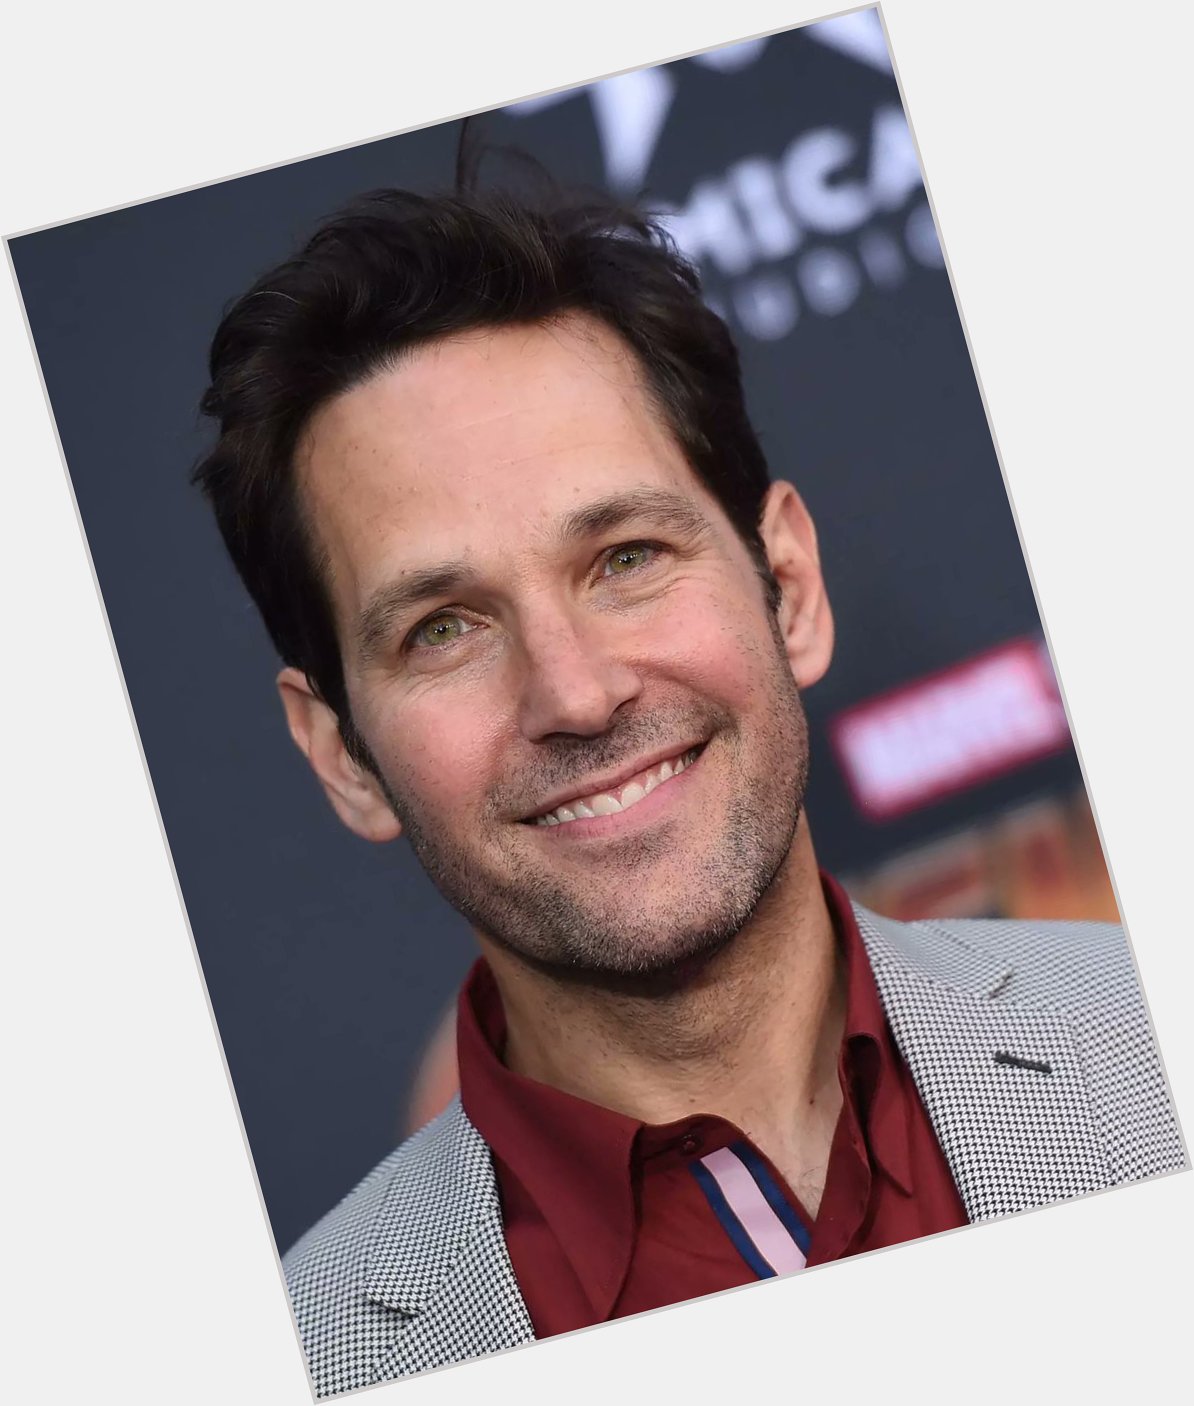 Happy birthday to the beautiful Paul Rudd, the actor who plays Ant Man at the MCU 